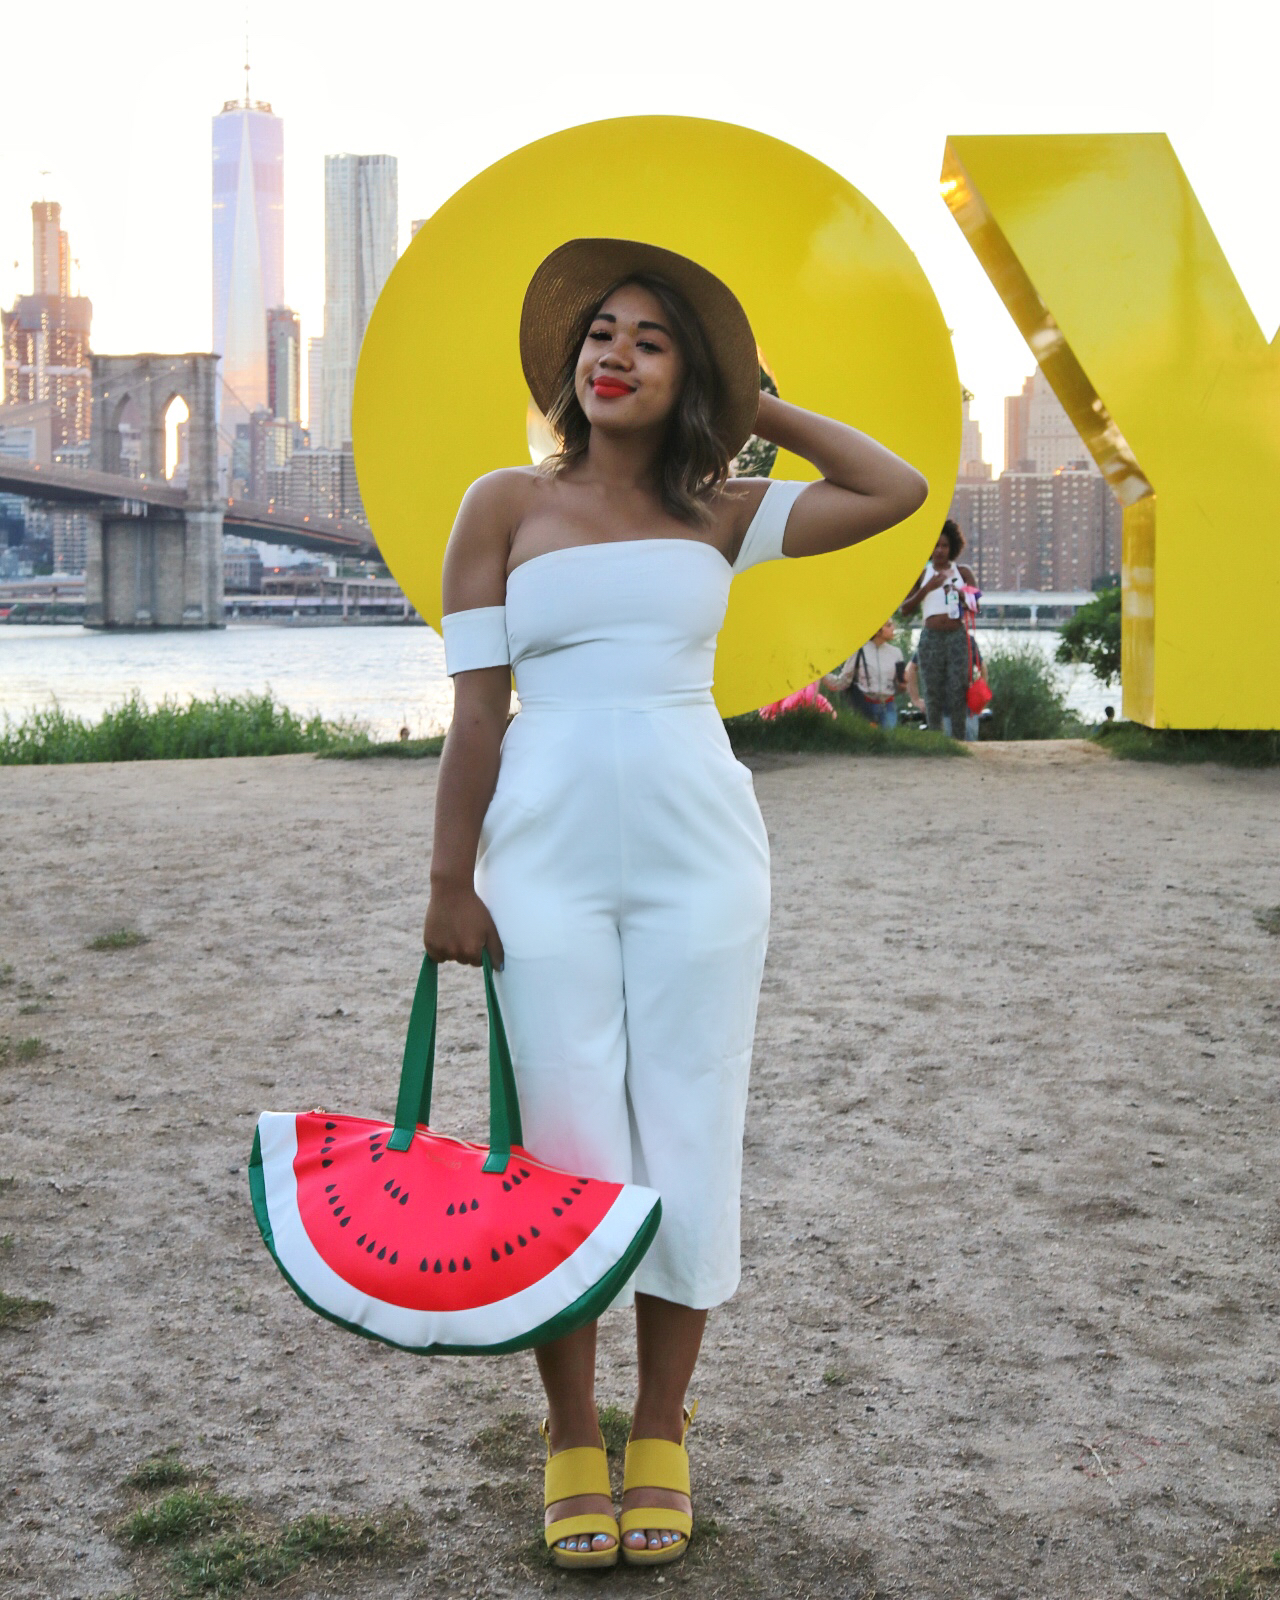 Color Me Courtney - Little White Jumpsuit // Jumpsuit >> http://bit.ly/littlewhitejumpsuit // Heels: http://bit.ly/yellow_sandals // bag: http://bit.ly/watermelonbagg